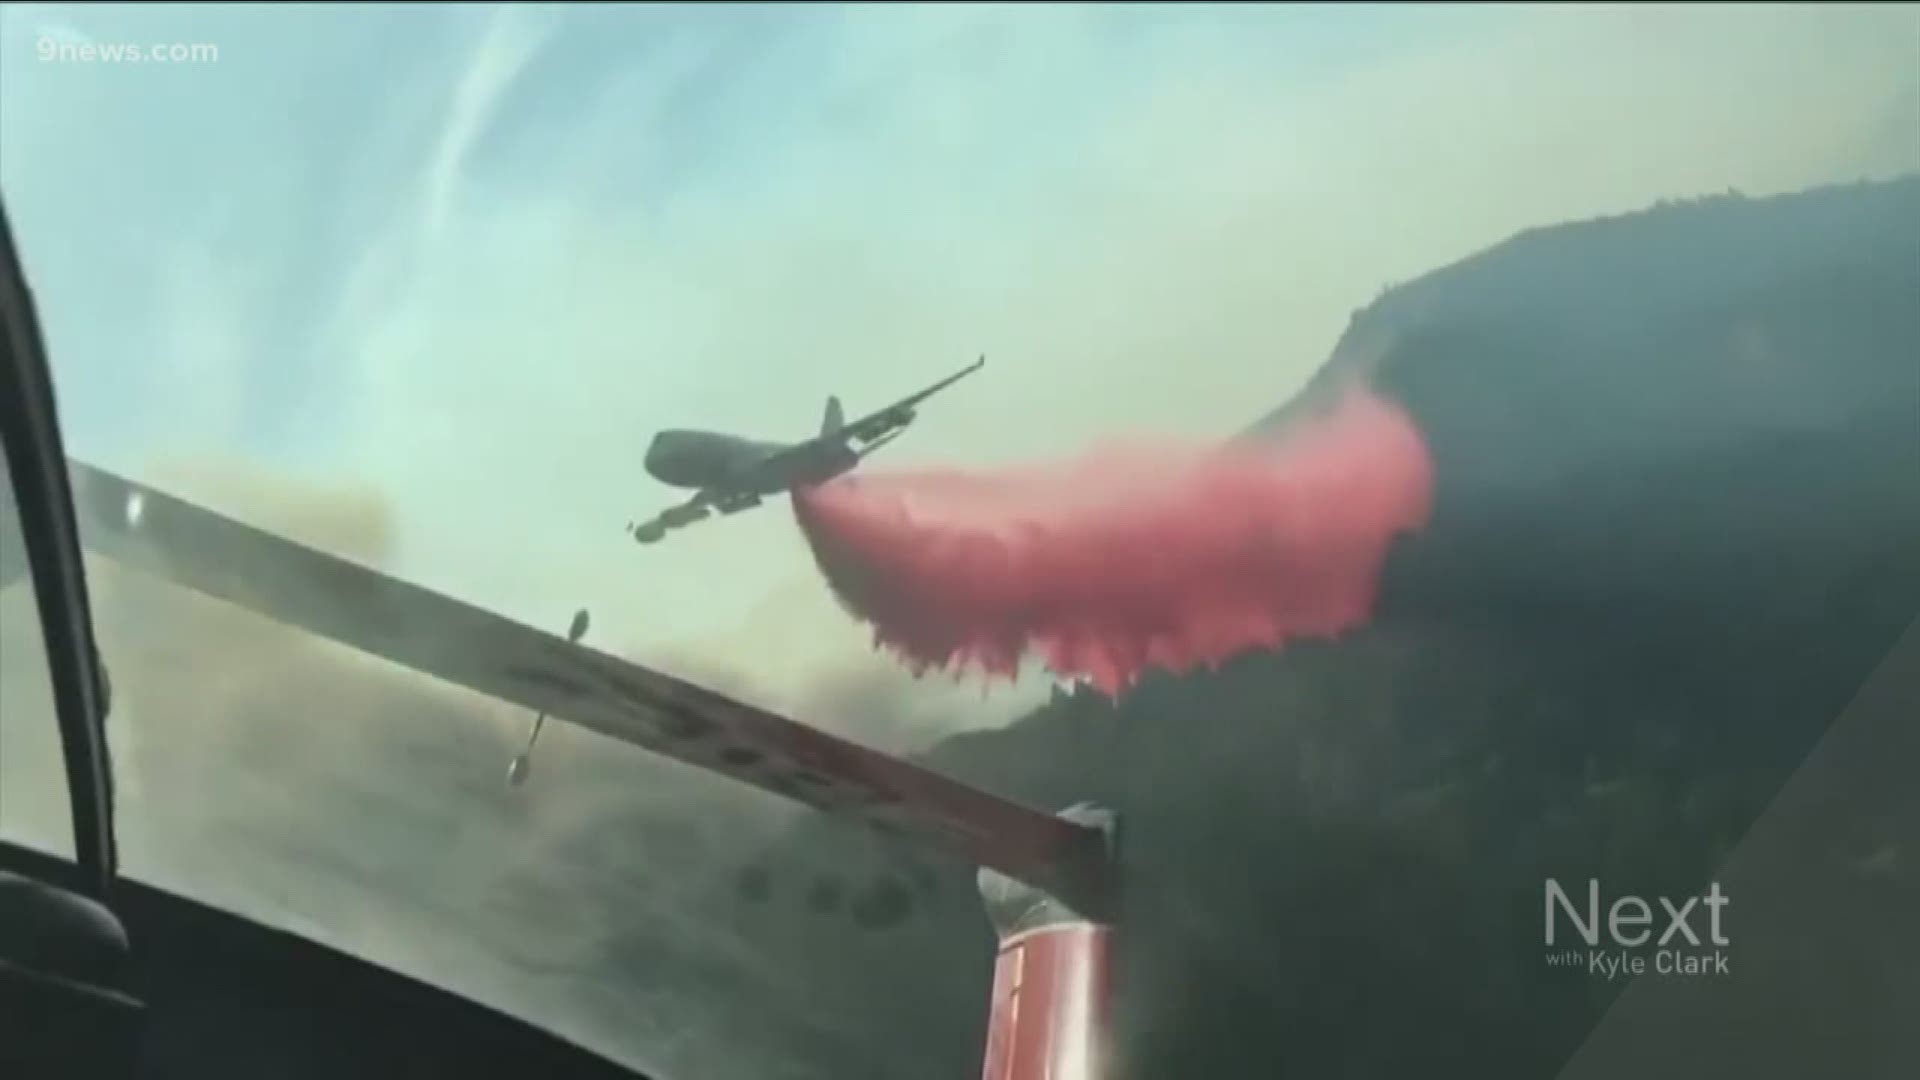 The world's largest firefighting aircraft is based in Colorado Springs. It can hold more than 19,000 gallons of water or retardant and make eight drops in one flight